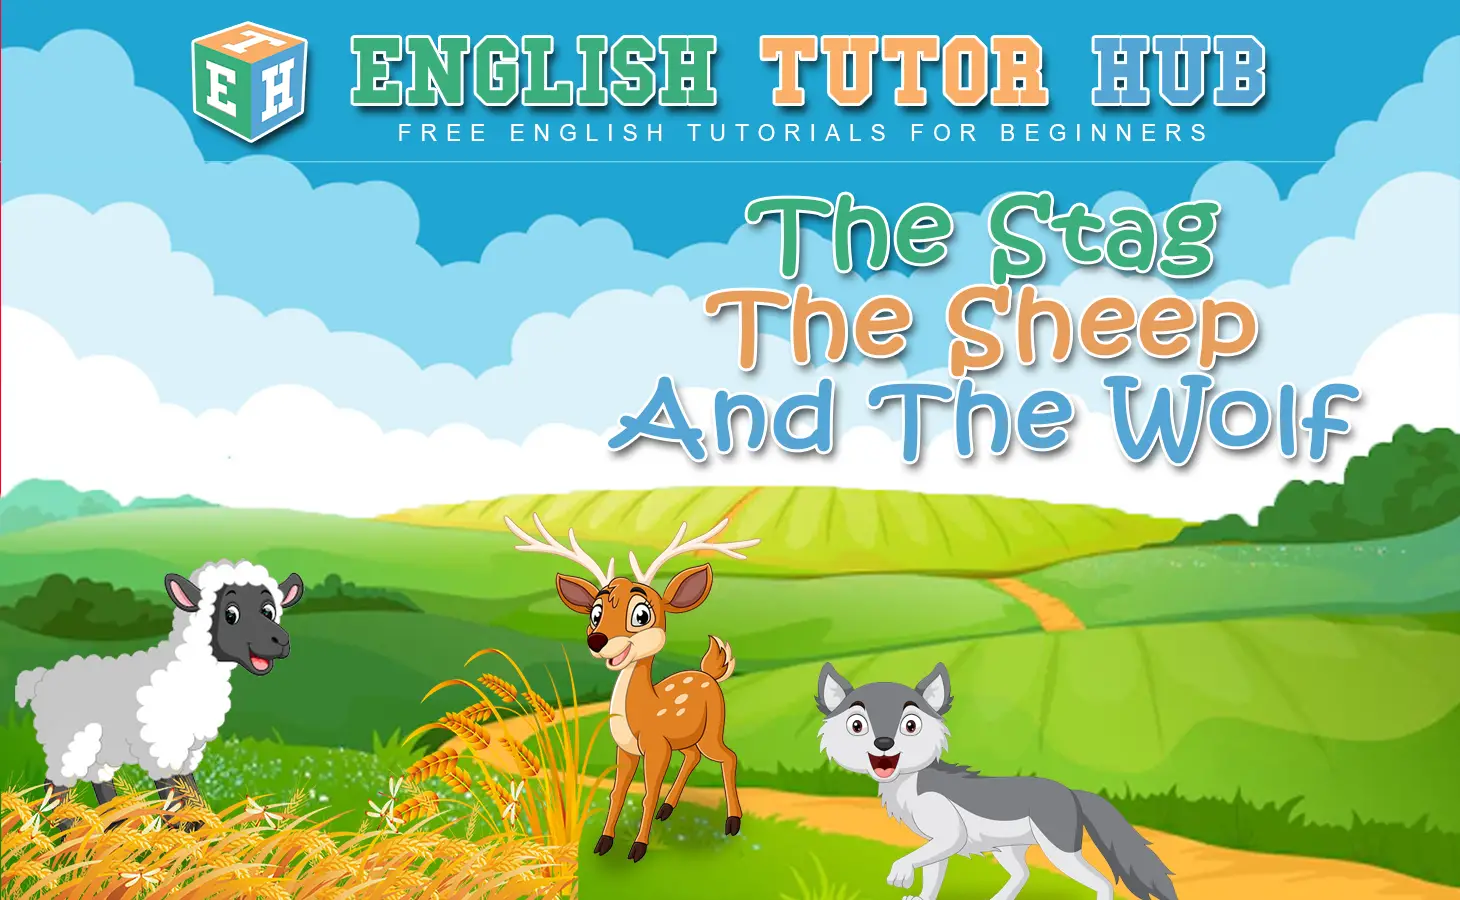 The Stag, the Sheep, & the Wolf Story With Moral Lesson And Summary